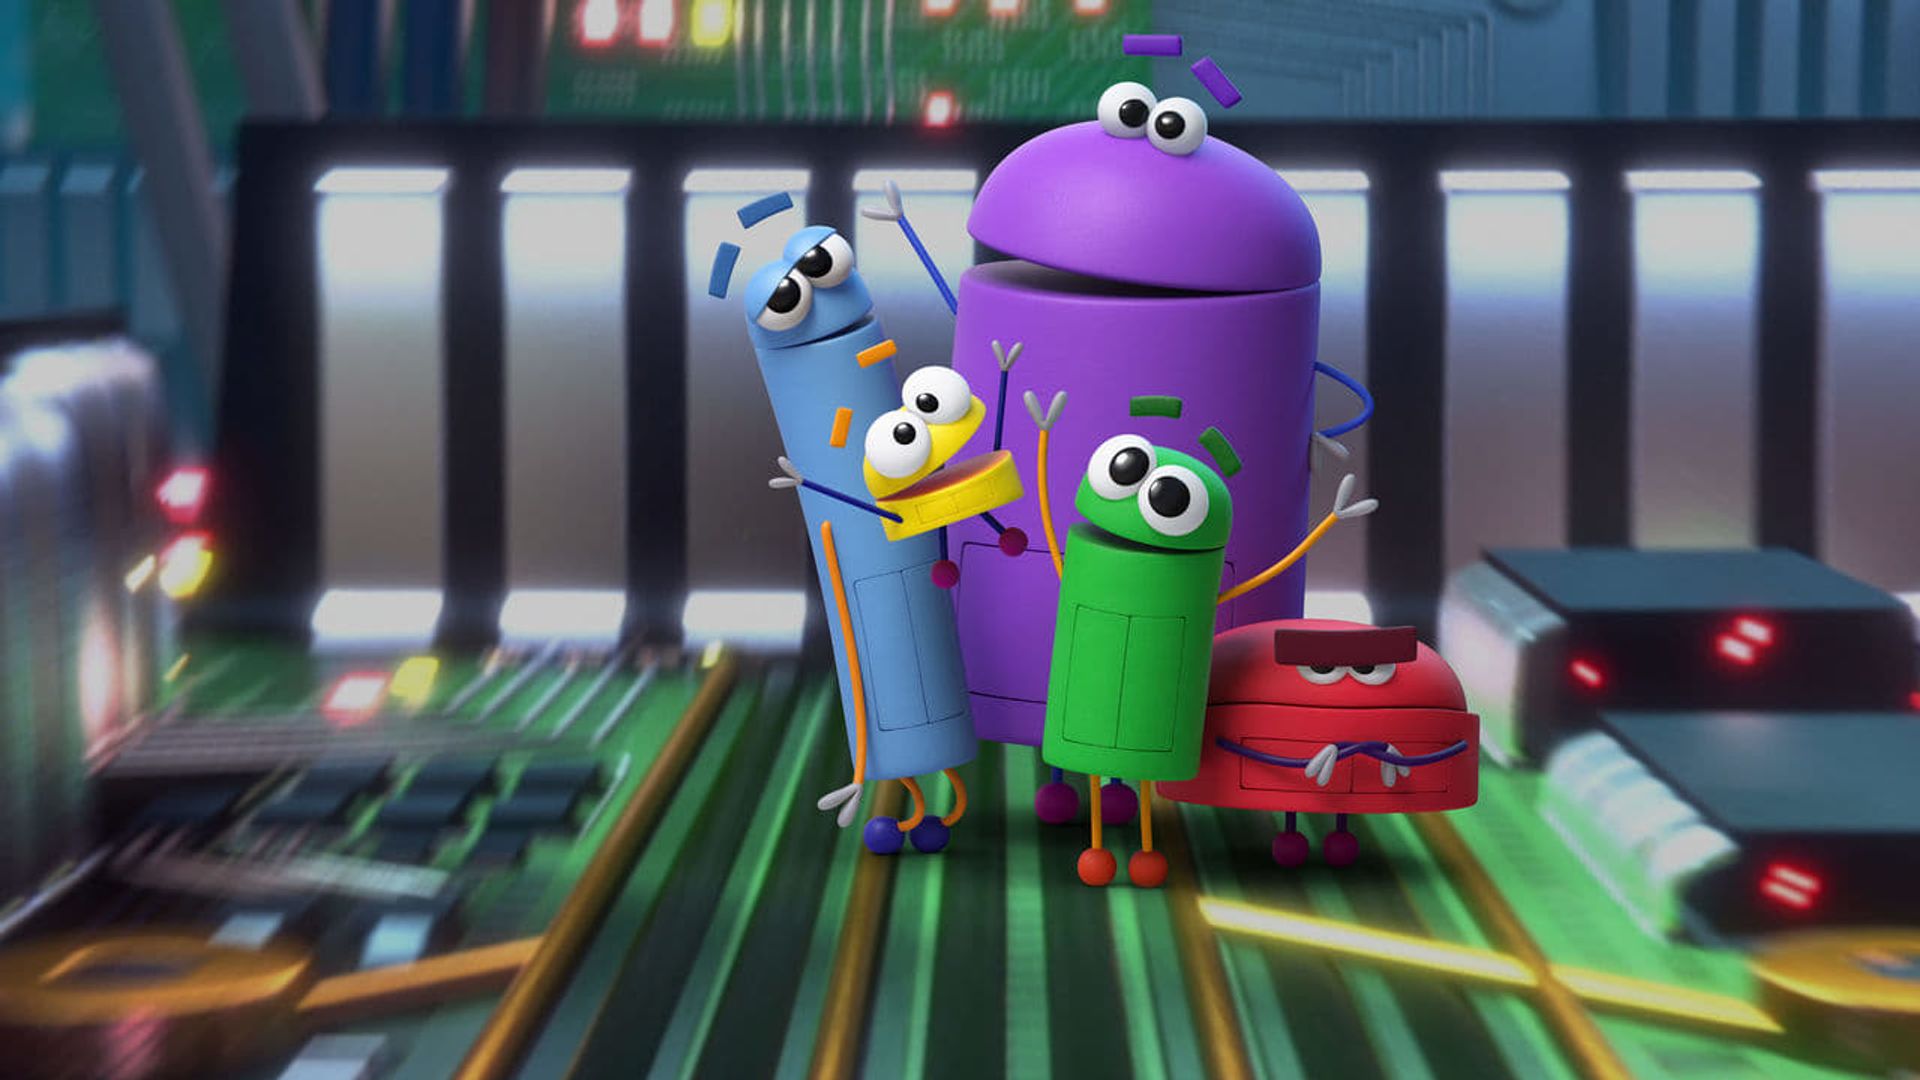 Ask the StoryBots background